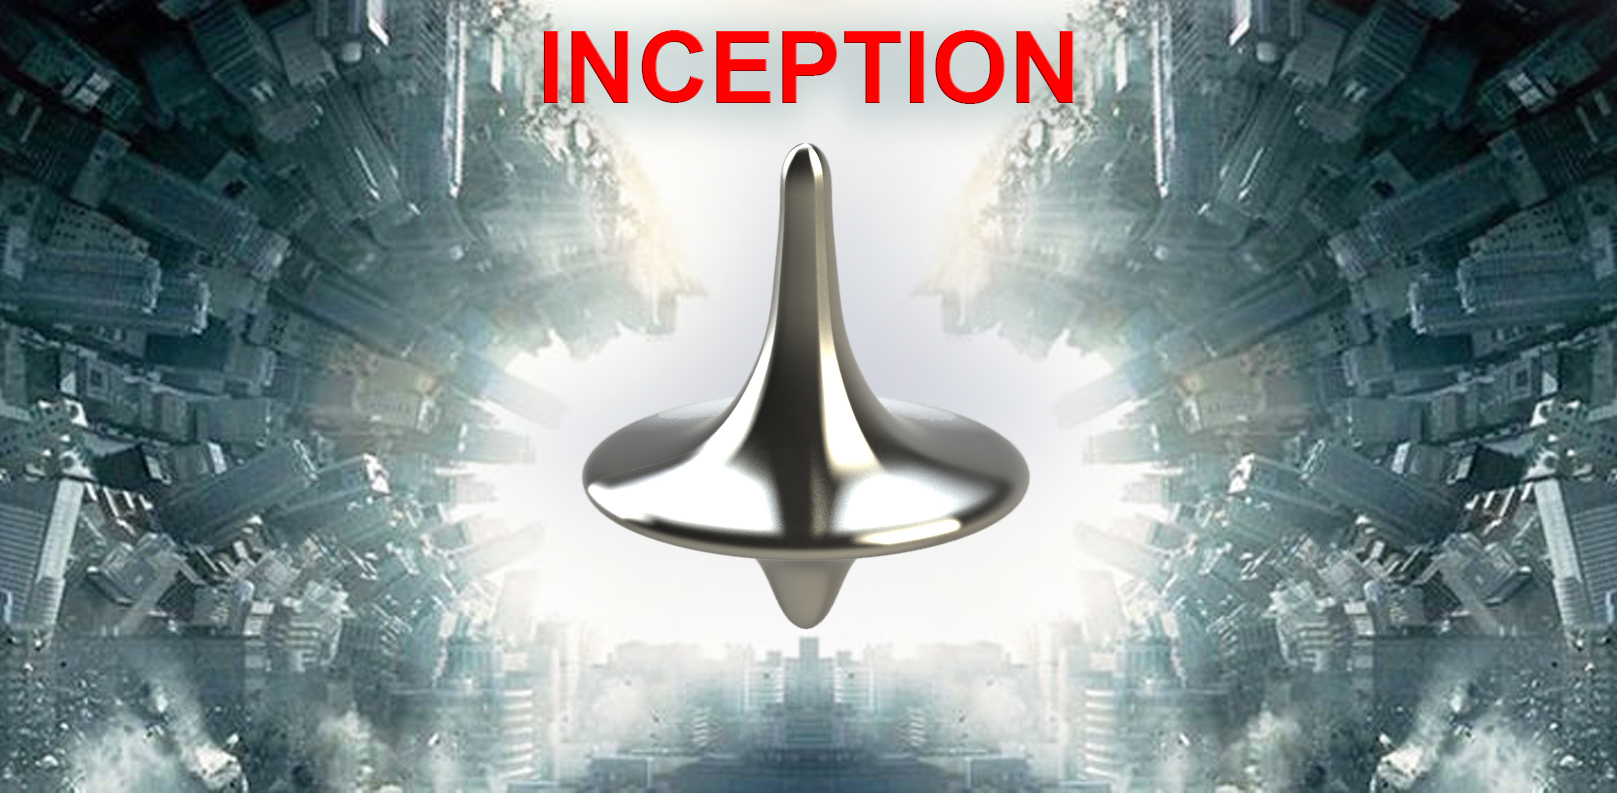 inception-spinning-top-3d-printing-11401